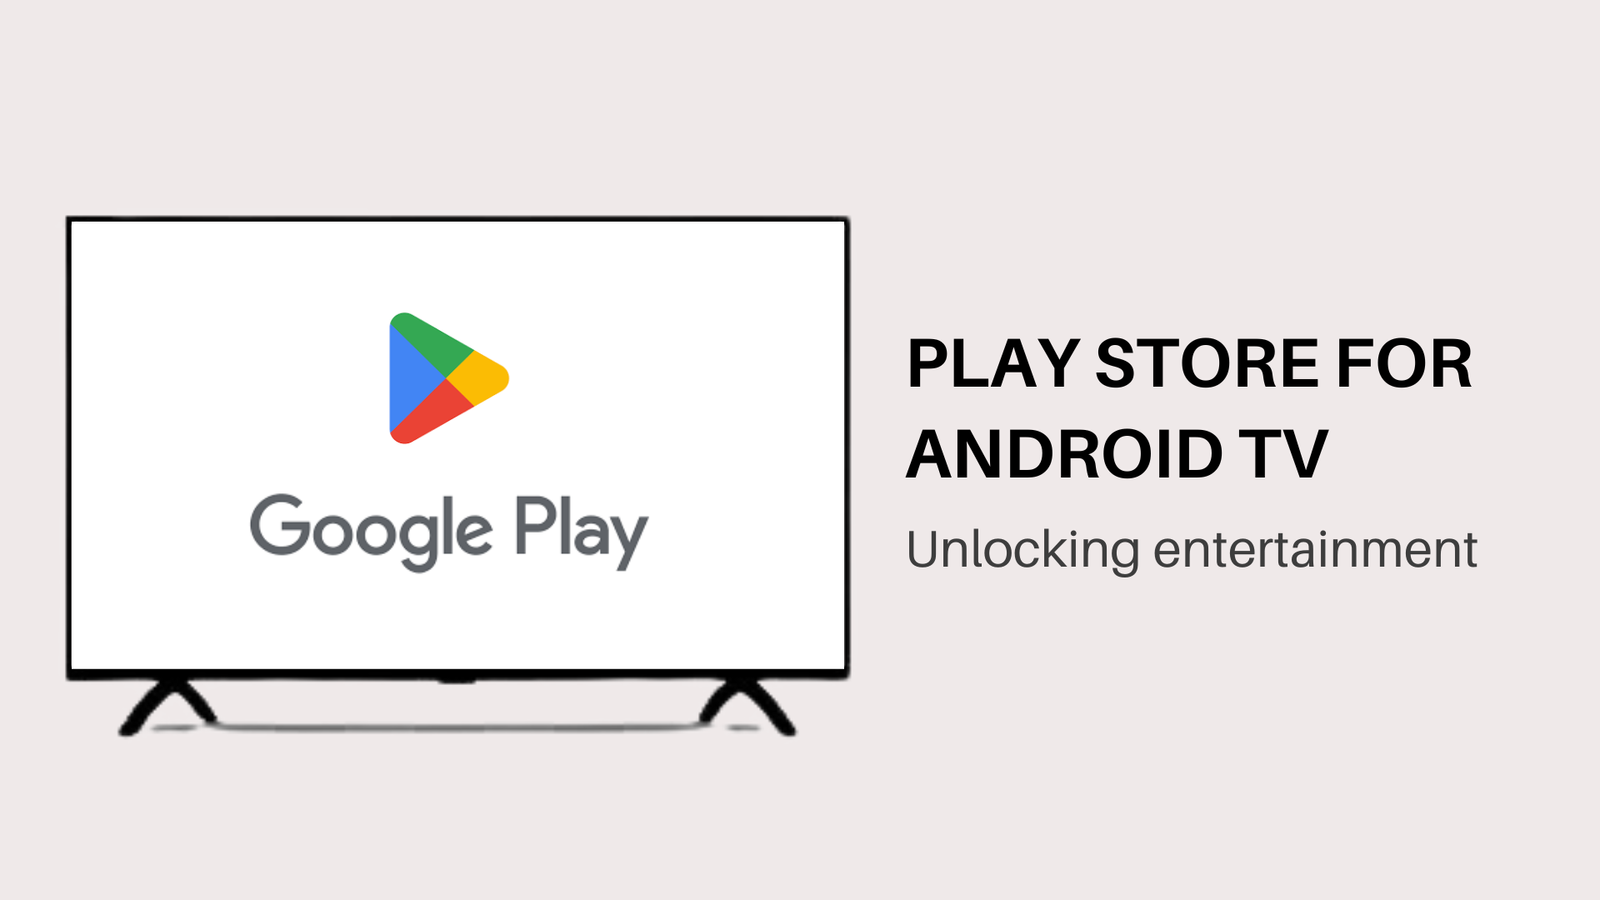 PLAY STORE FOR ANDROID TV - Unlocking entertainment